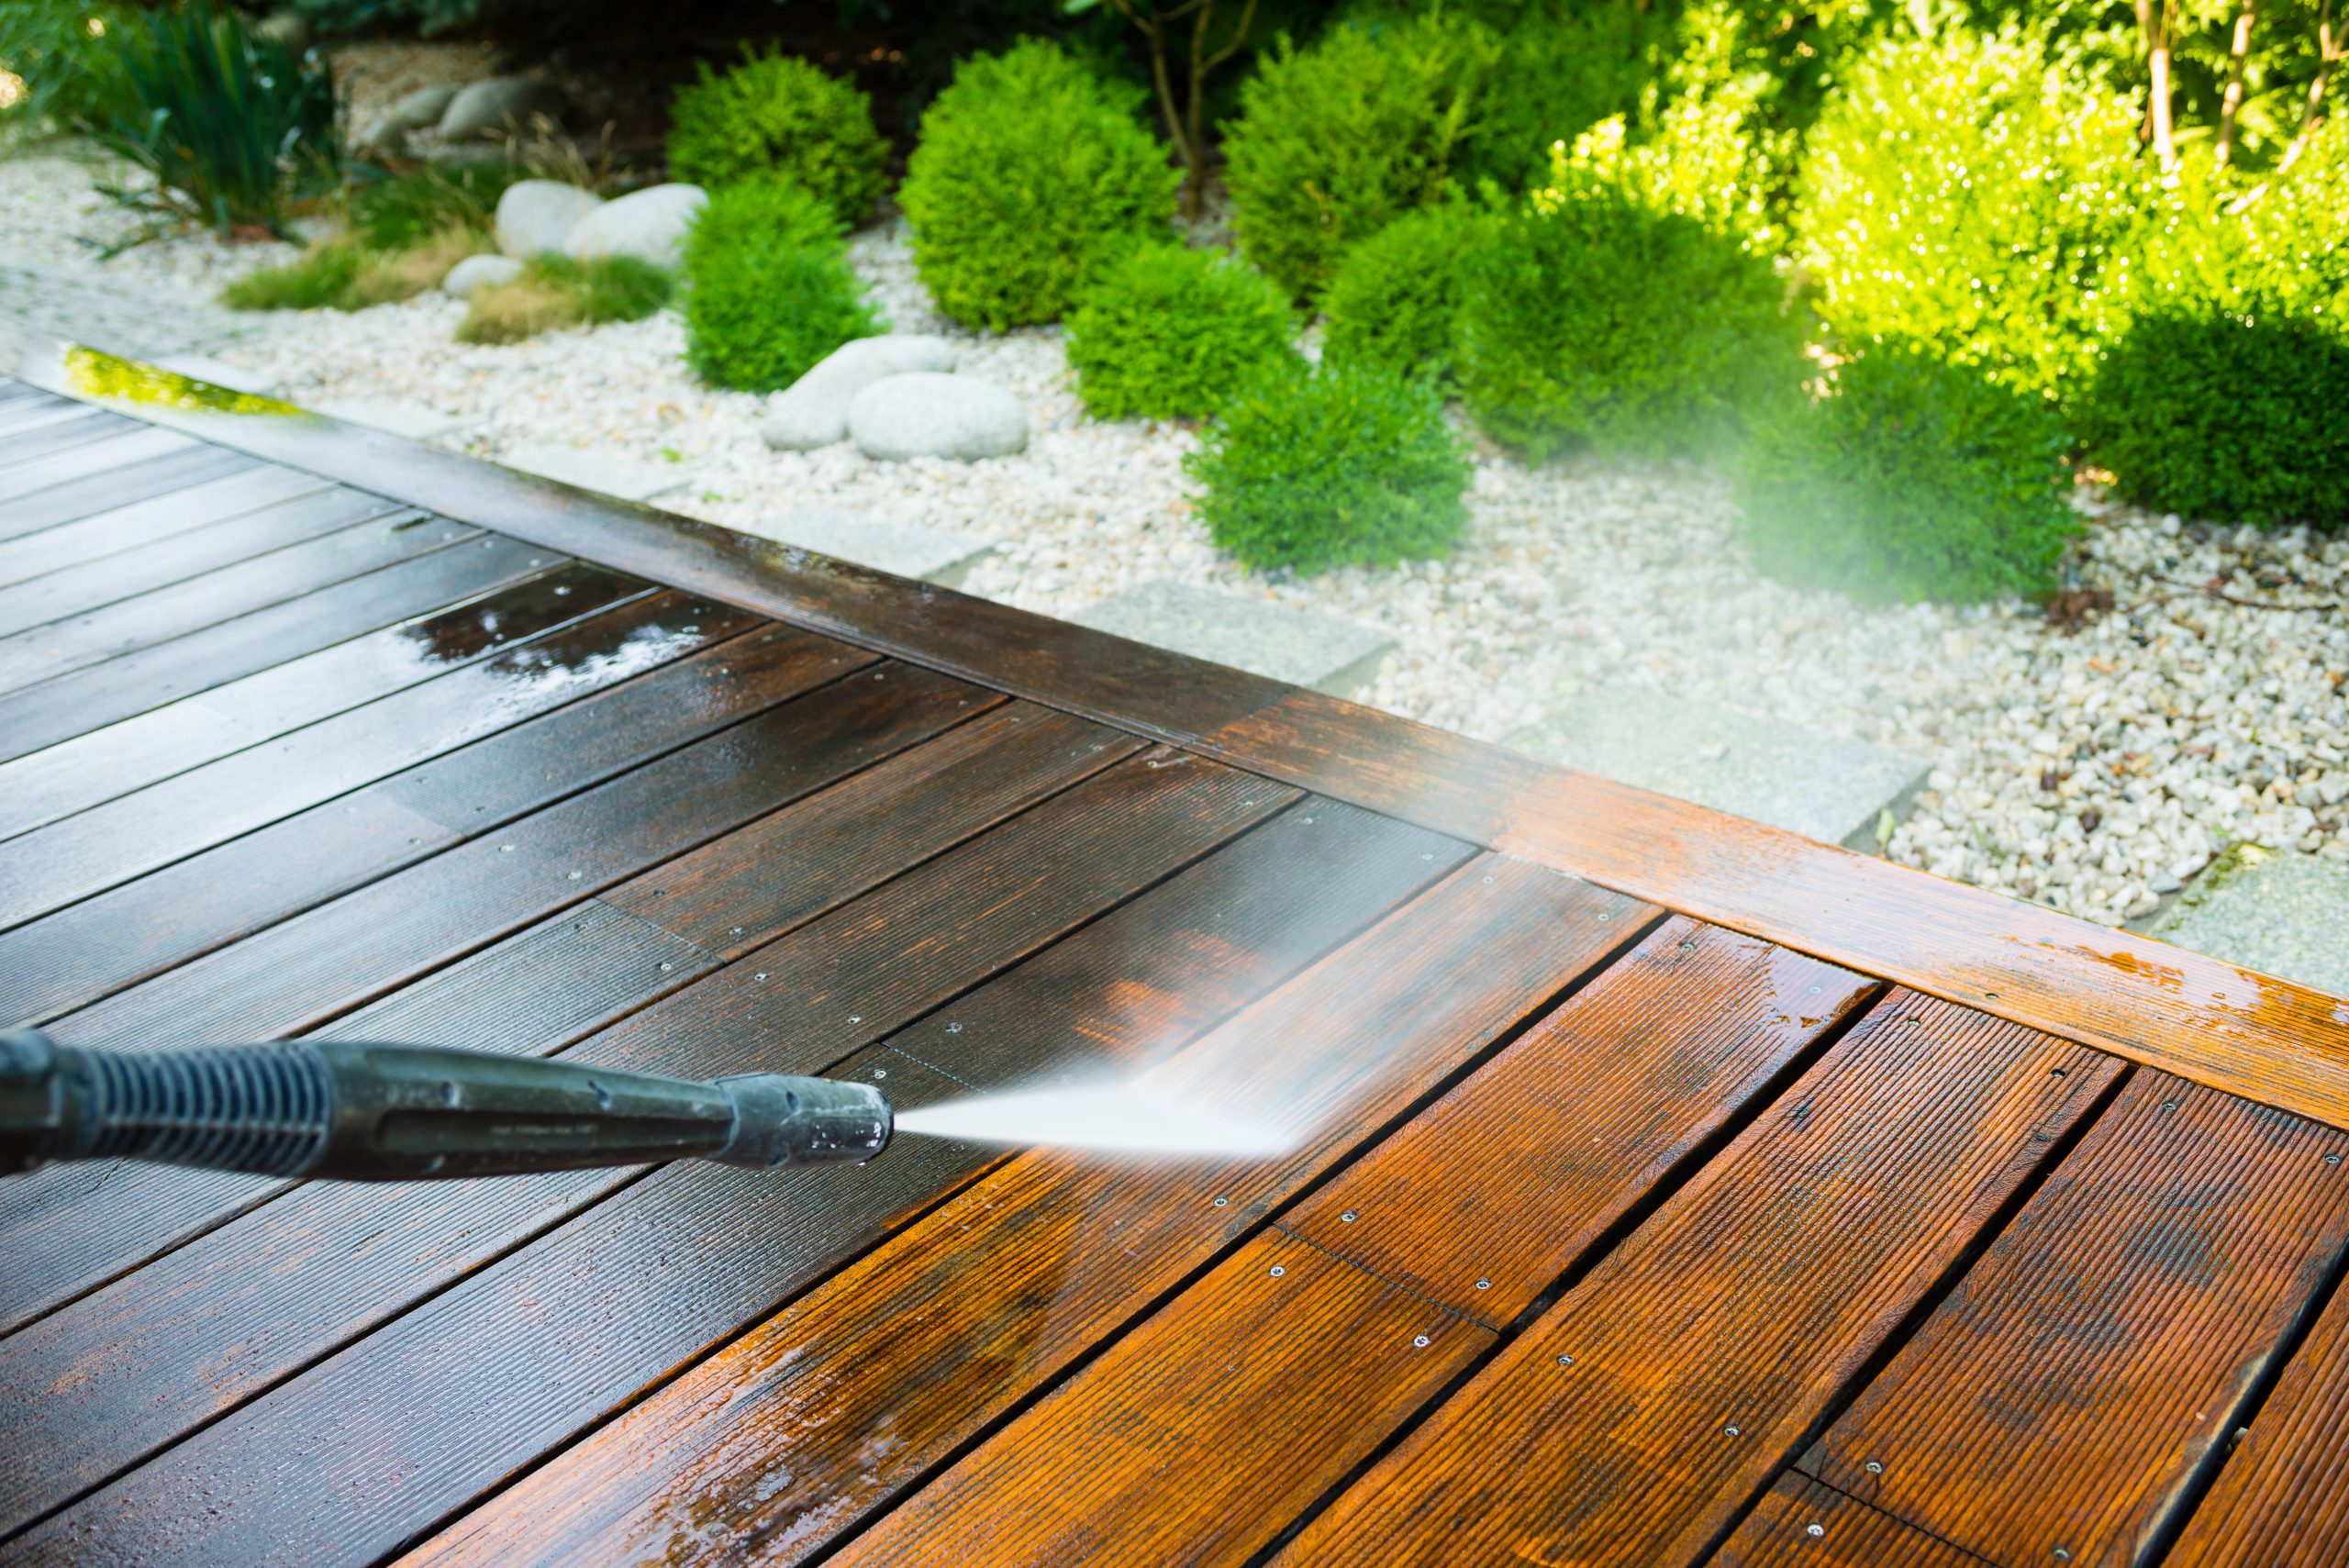 7 Pressure Washing Mistakes To Avoid At All Costs